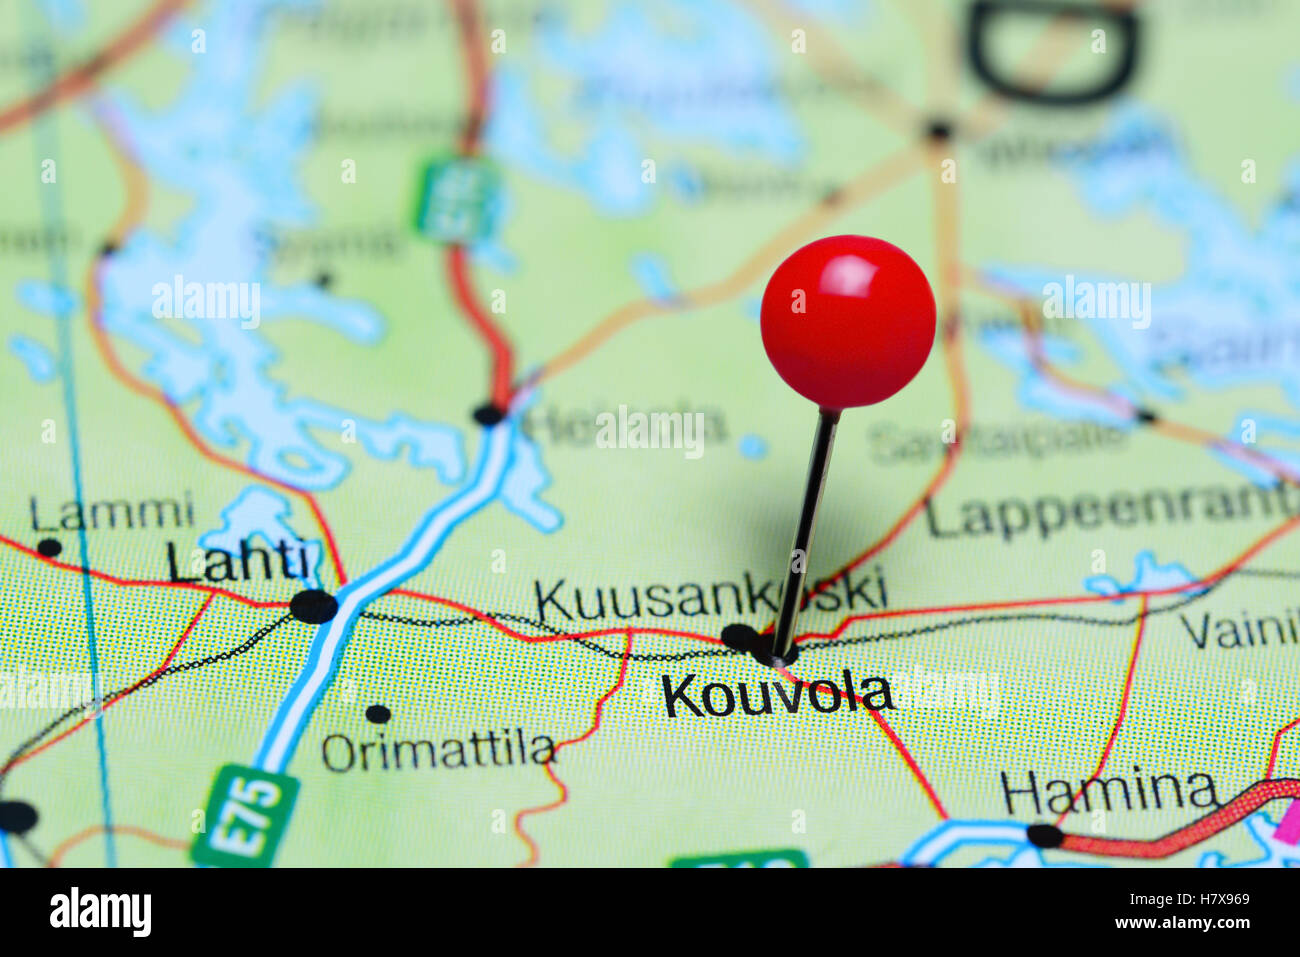 Kouvola pinned on a map of Finland Stock Photo